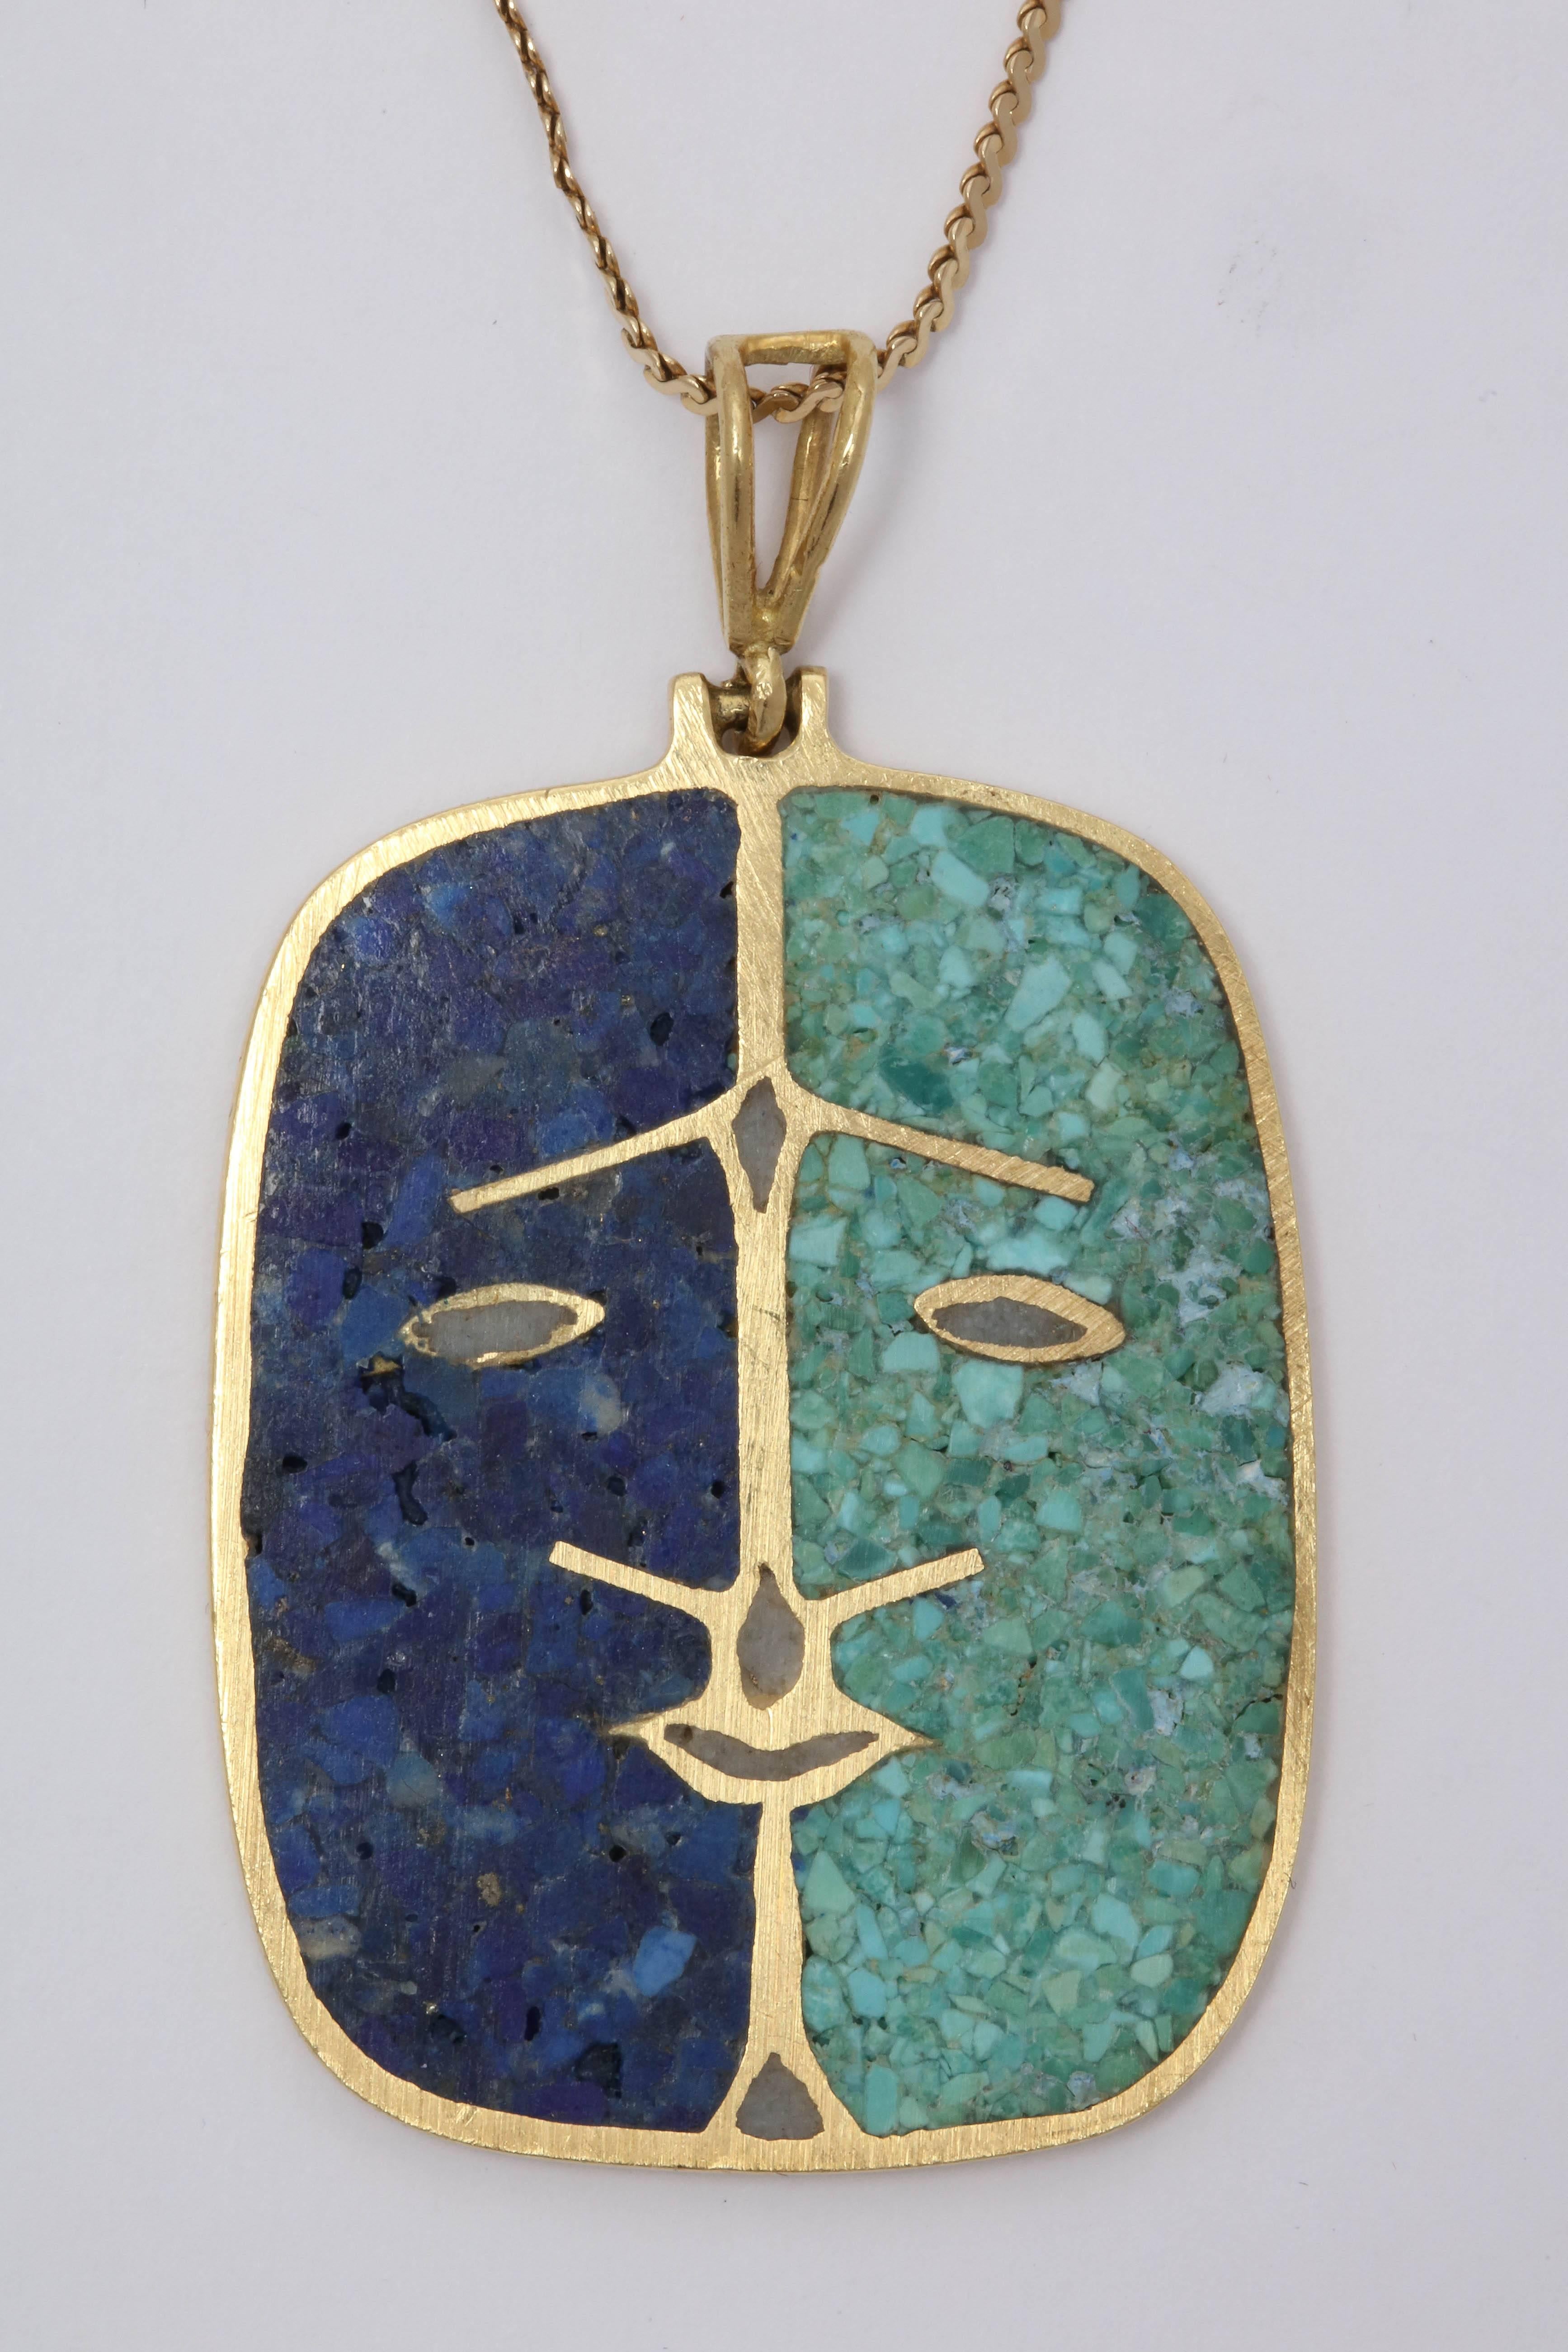 Women's or Men's 1970s Lapis Lazuli and Malachite with Face Double-Sided Gold Pendant and Chain